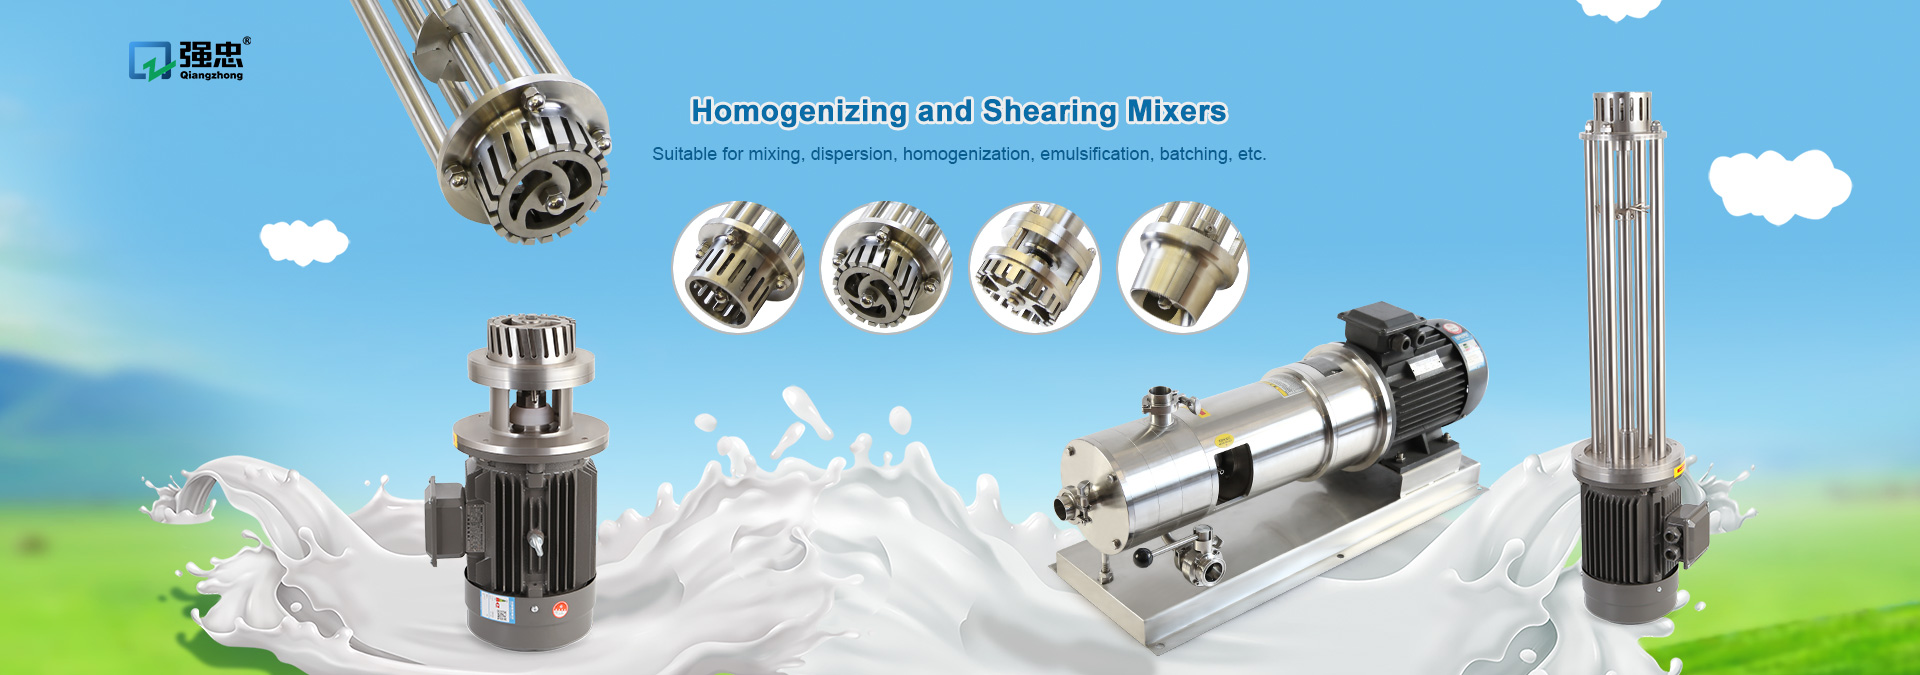 Mobile Manual Lifter, Magnetic Stirrer, Jacketed Mixing Tank - Qiangzhong